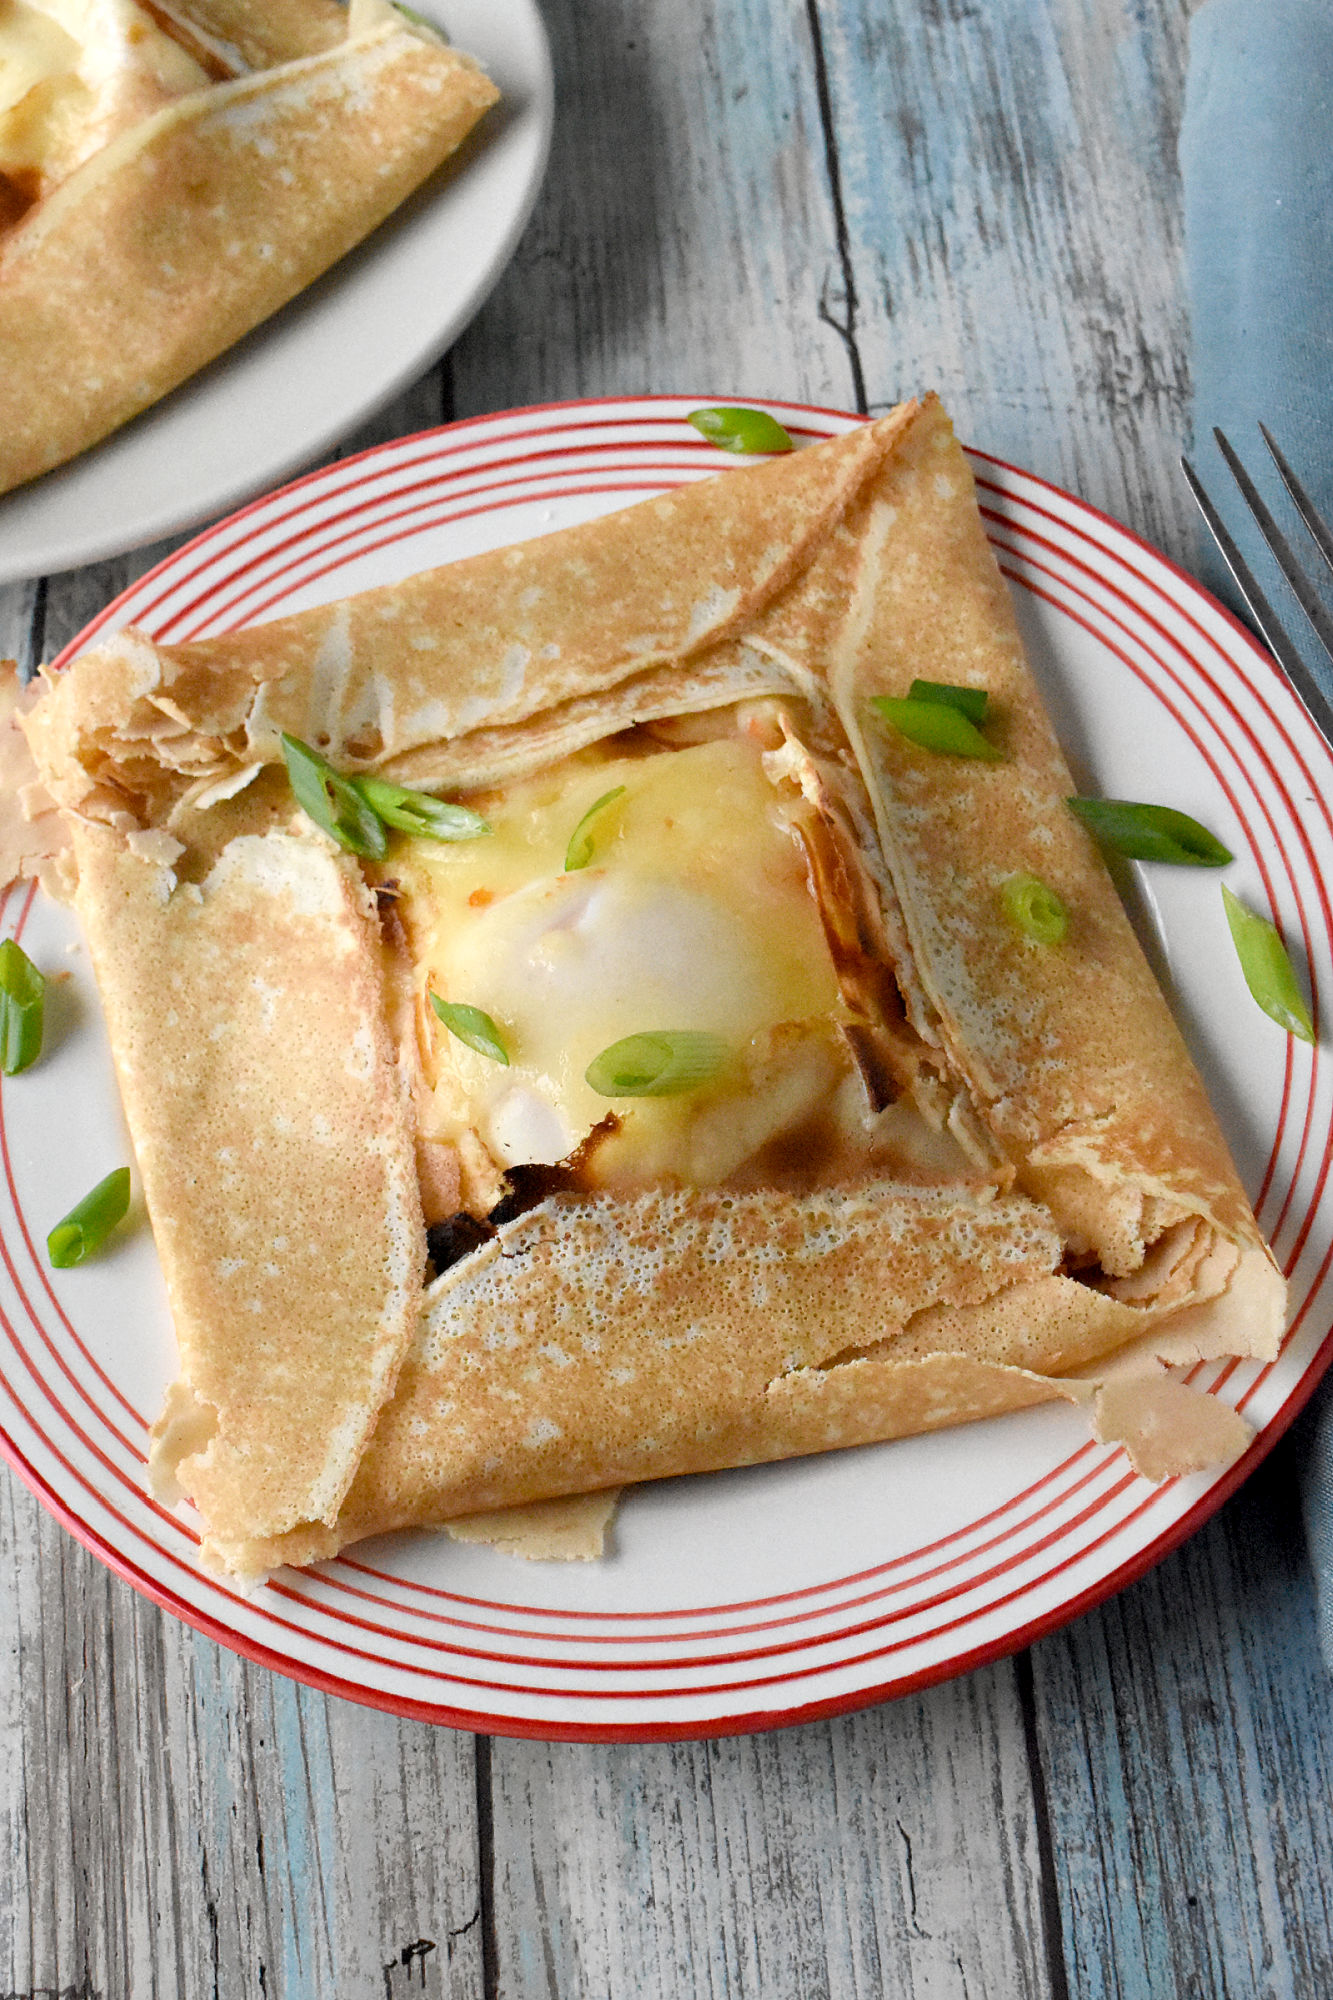 Tex-Mex Breakfast Crepes are the perfect combination of savory and spicy.  Get ready for a flavor fiesta! #TexMexCrepes #BreakfastCrepes #MexicanBreakfast #CrepesofInstagram #FoodieBreakfast
